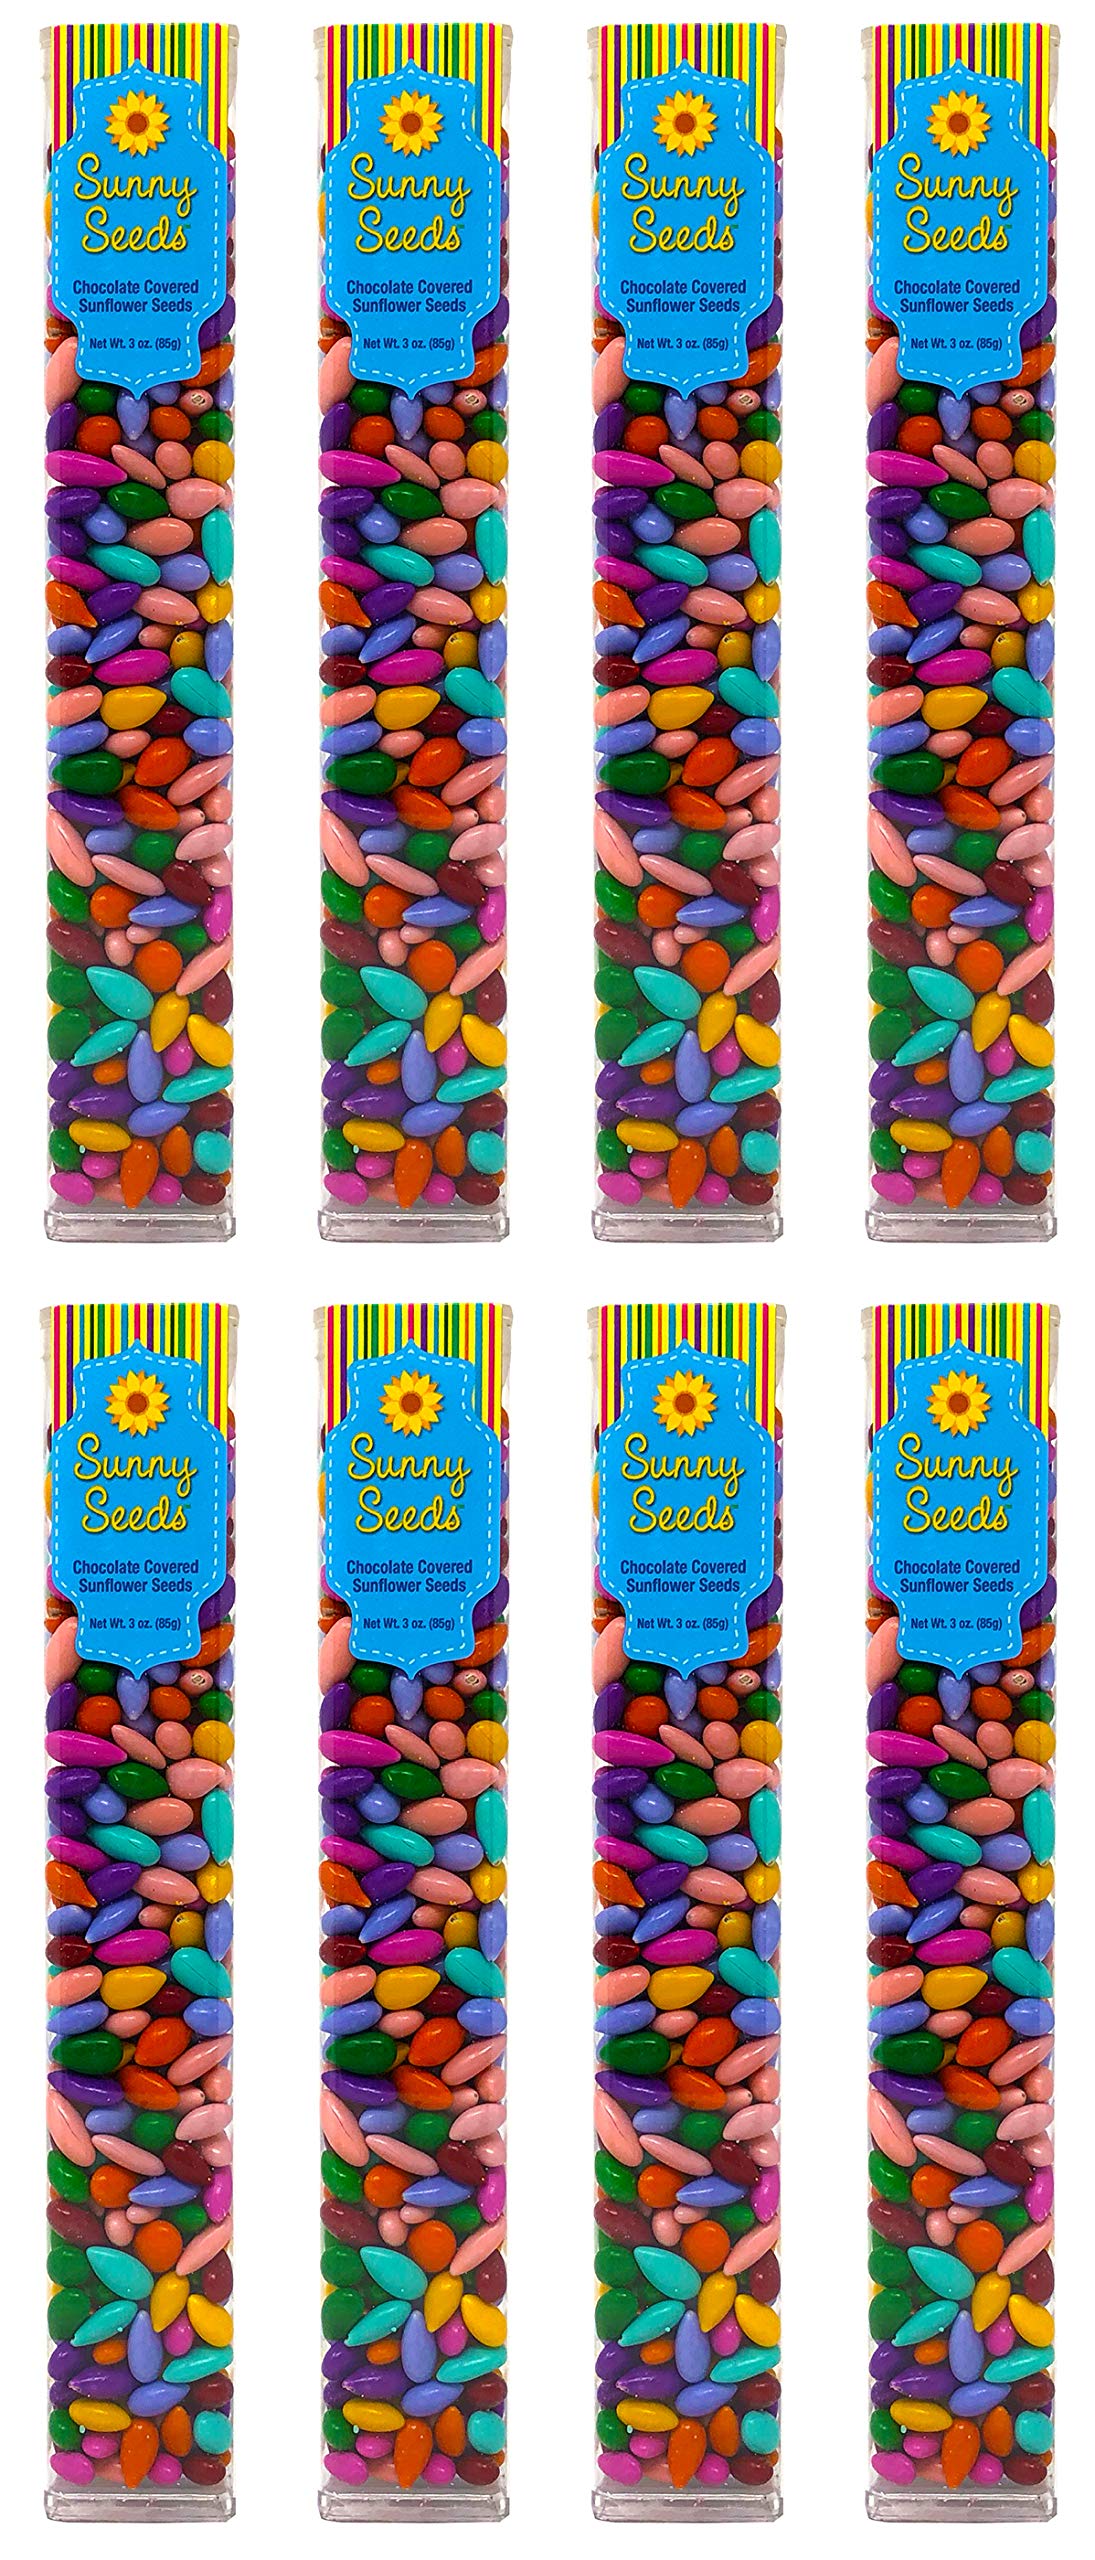 Chocolate Covered Sunflower Seeds Multicolored Candy Coated Treats - Rainbow Party Favors (Case of 24)